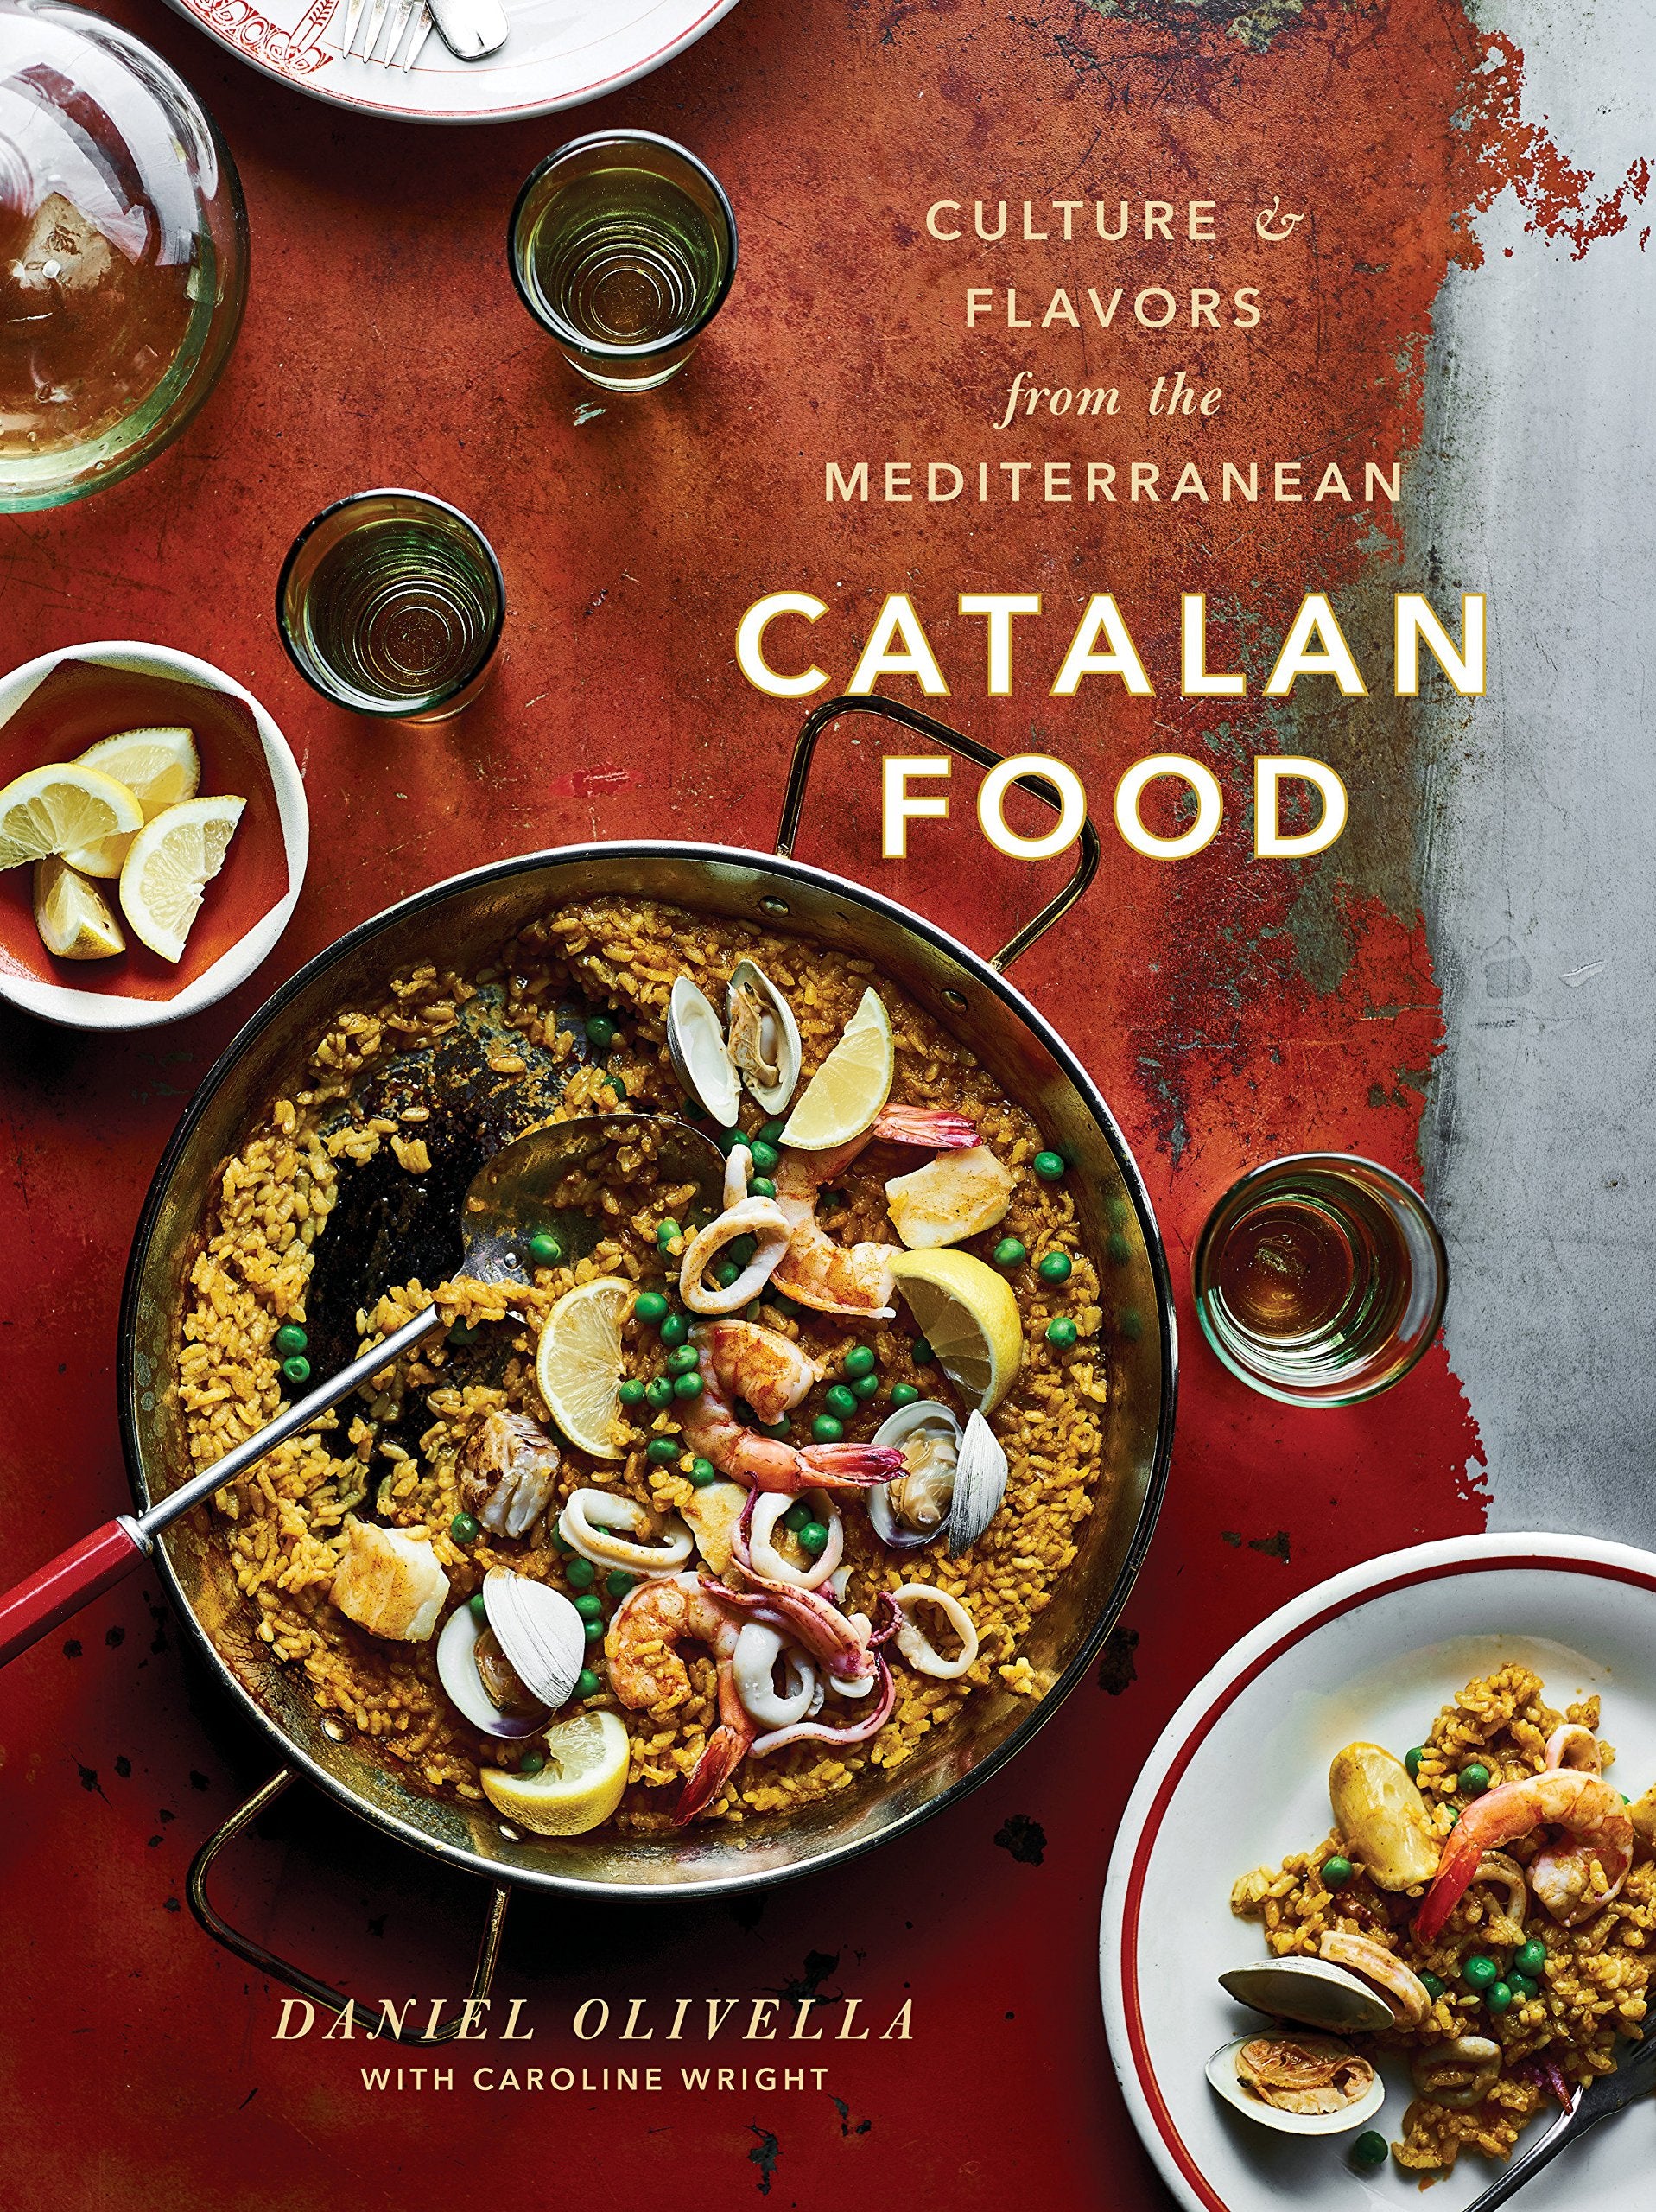 Catalan Food: Culture and Flavors from the Mediterranean (Daniel Olivella, Caroline Wright)